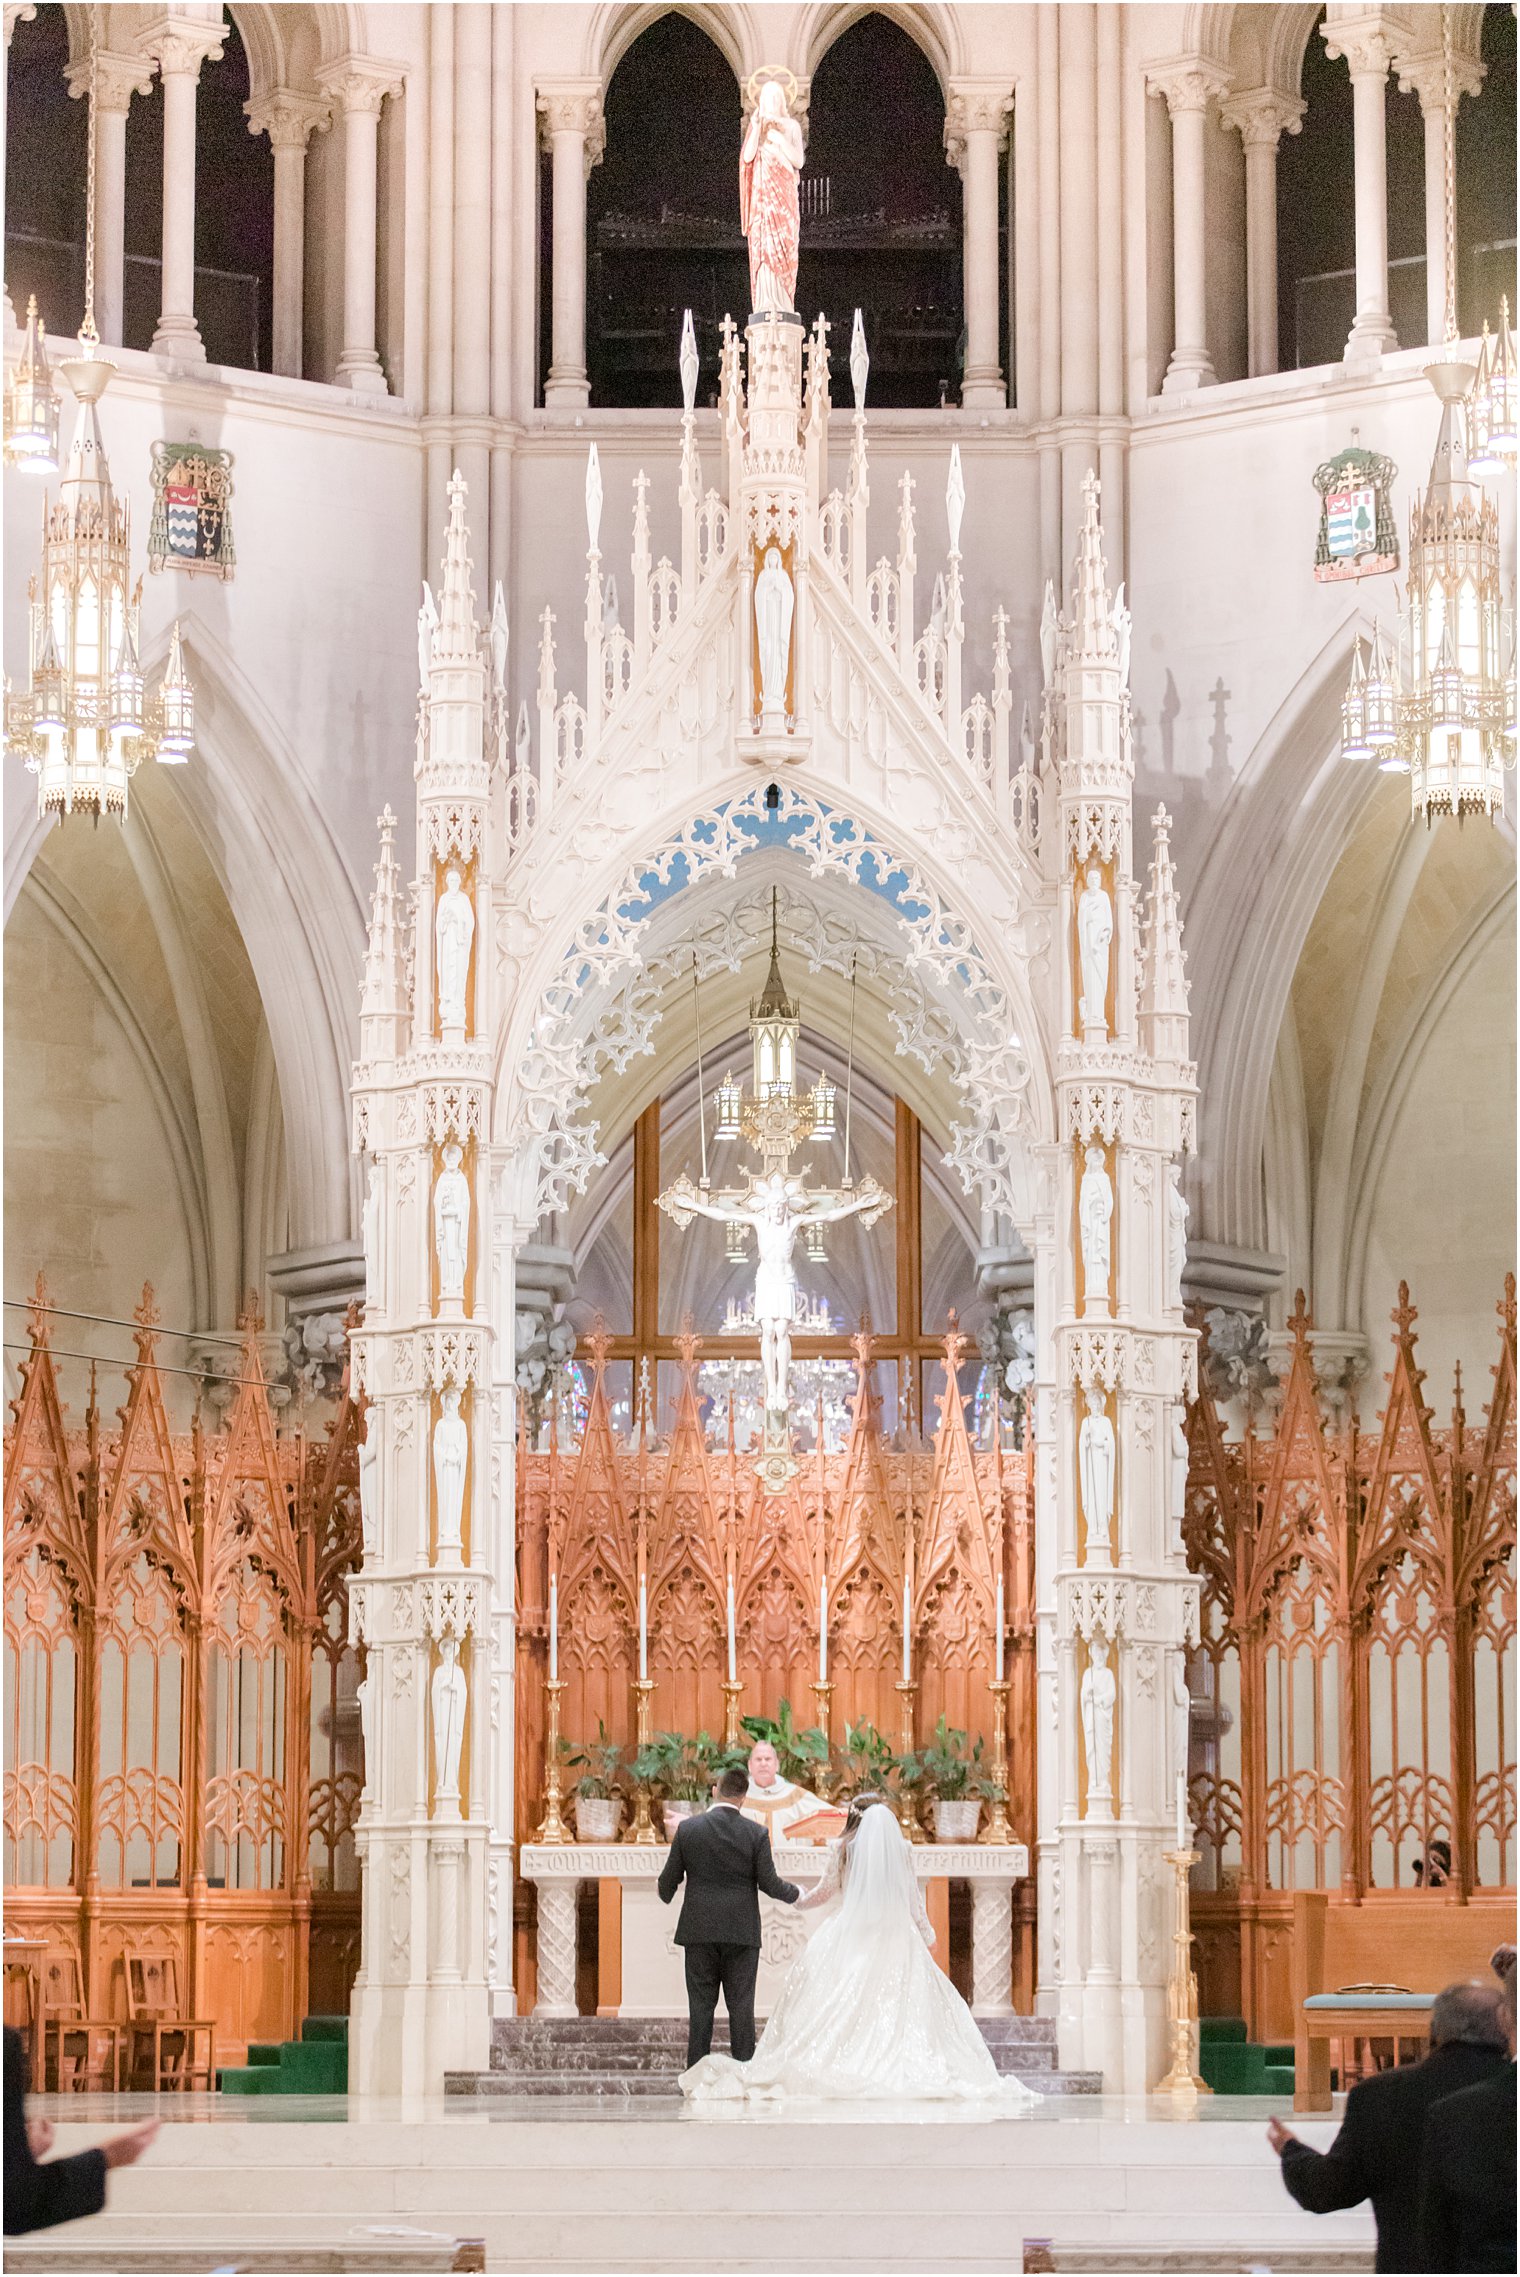 Wedding ceremony at The Cathedral Basilica of the Sacred Heart - Newark, NJ